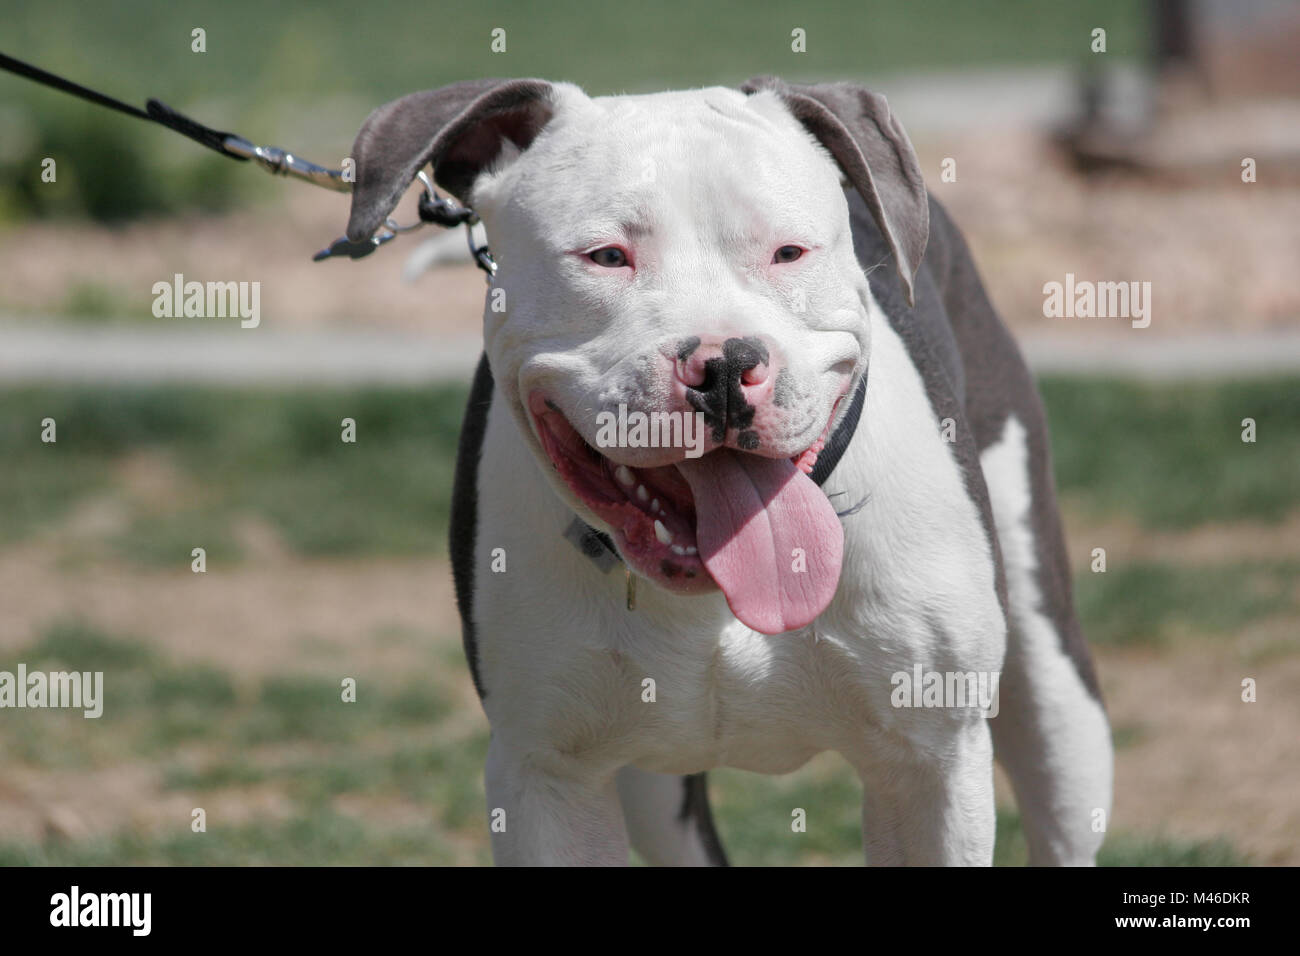 Happy pitbull on a leash getting ready to play Stock Photo